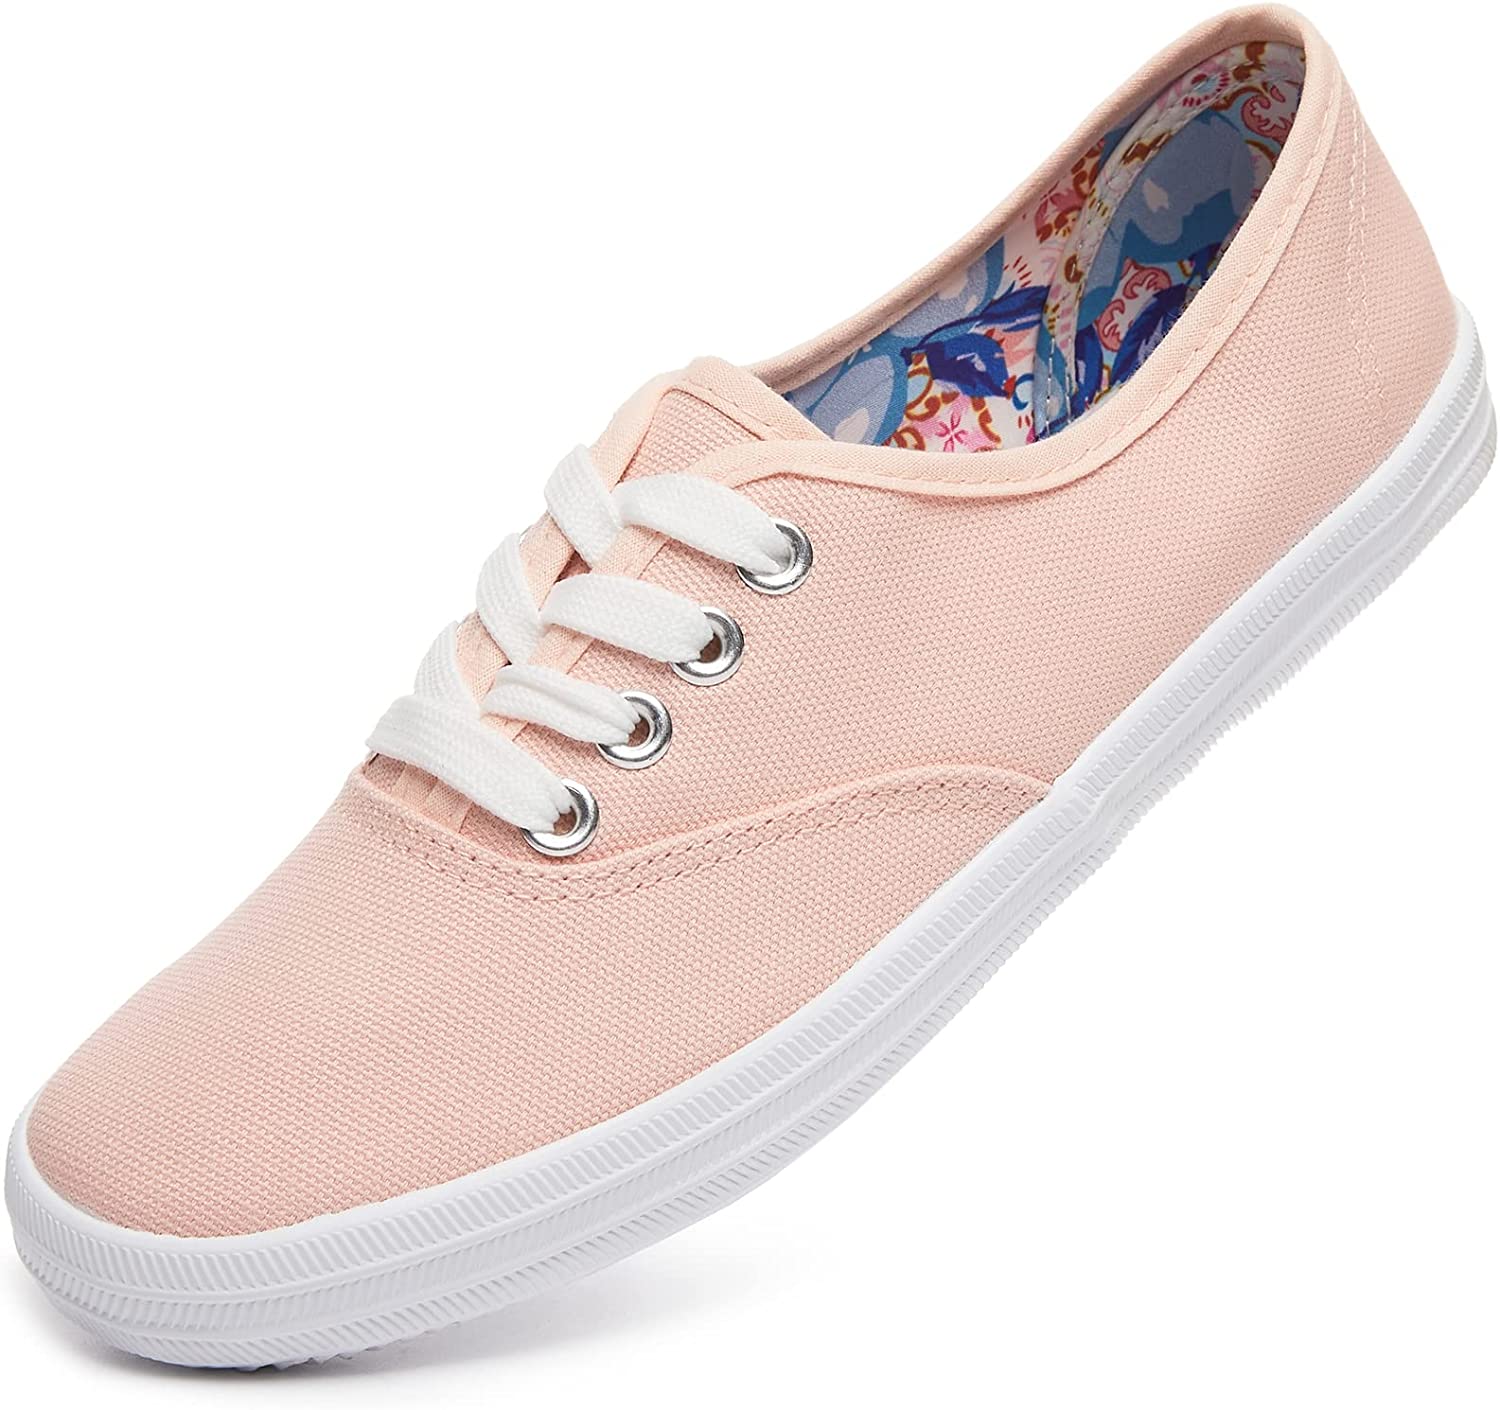 Women's Canvas Shoes Fashion Sneakers White Tennis Shoes Casual Slip on  Shoes Floral Embroidered Low Top Sneakers